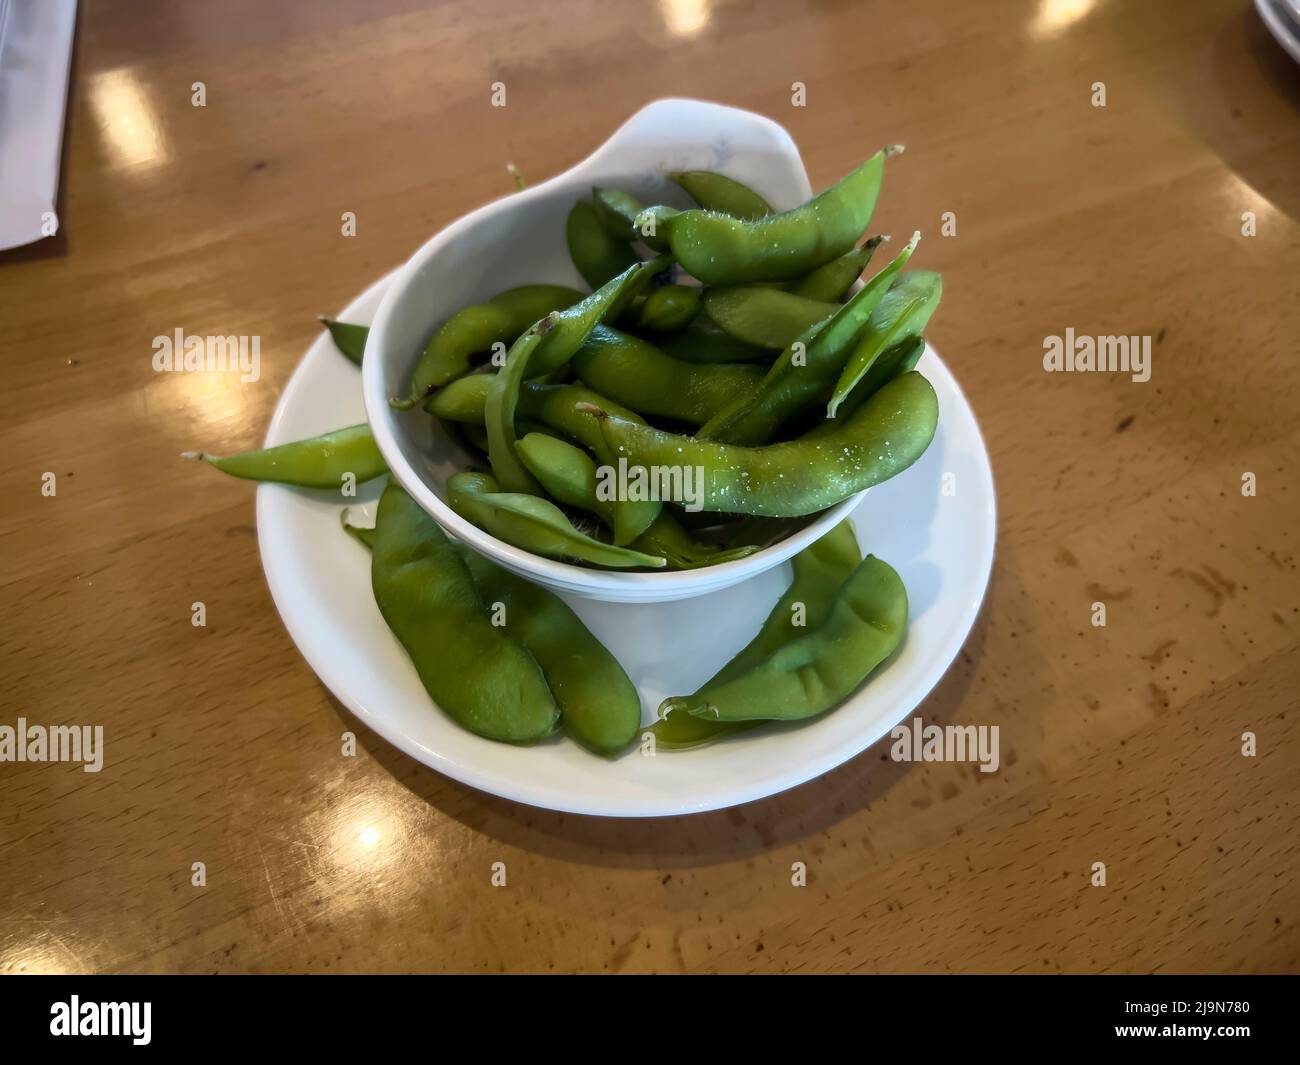 Close up, selective focus on edamame pods in a small white cup on a wooden table inside a restaurant Stock Photo